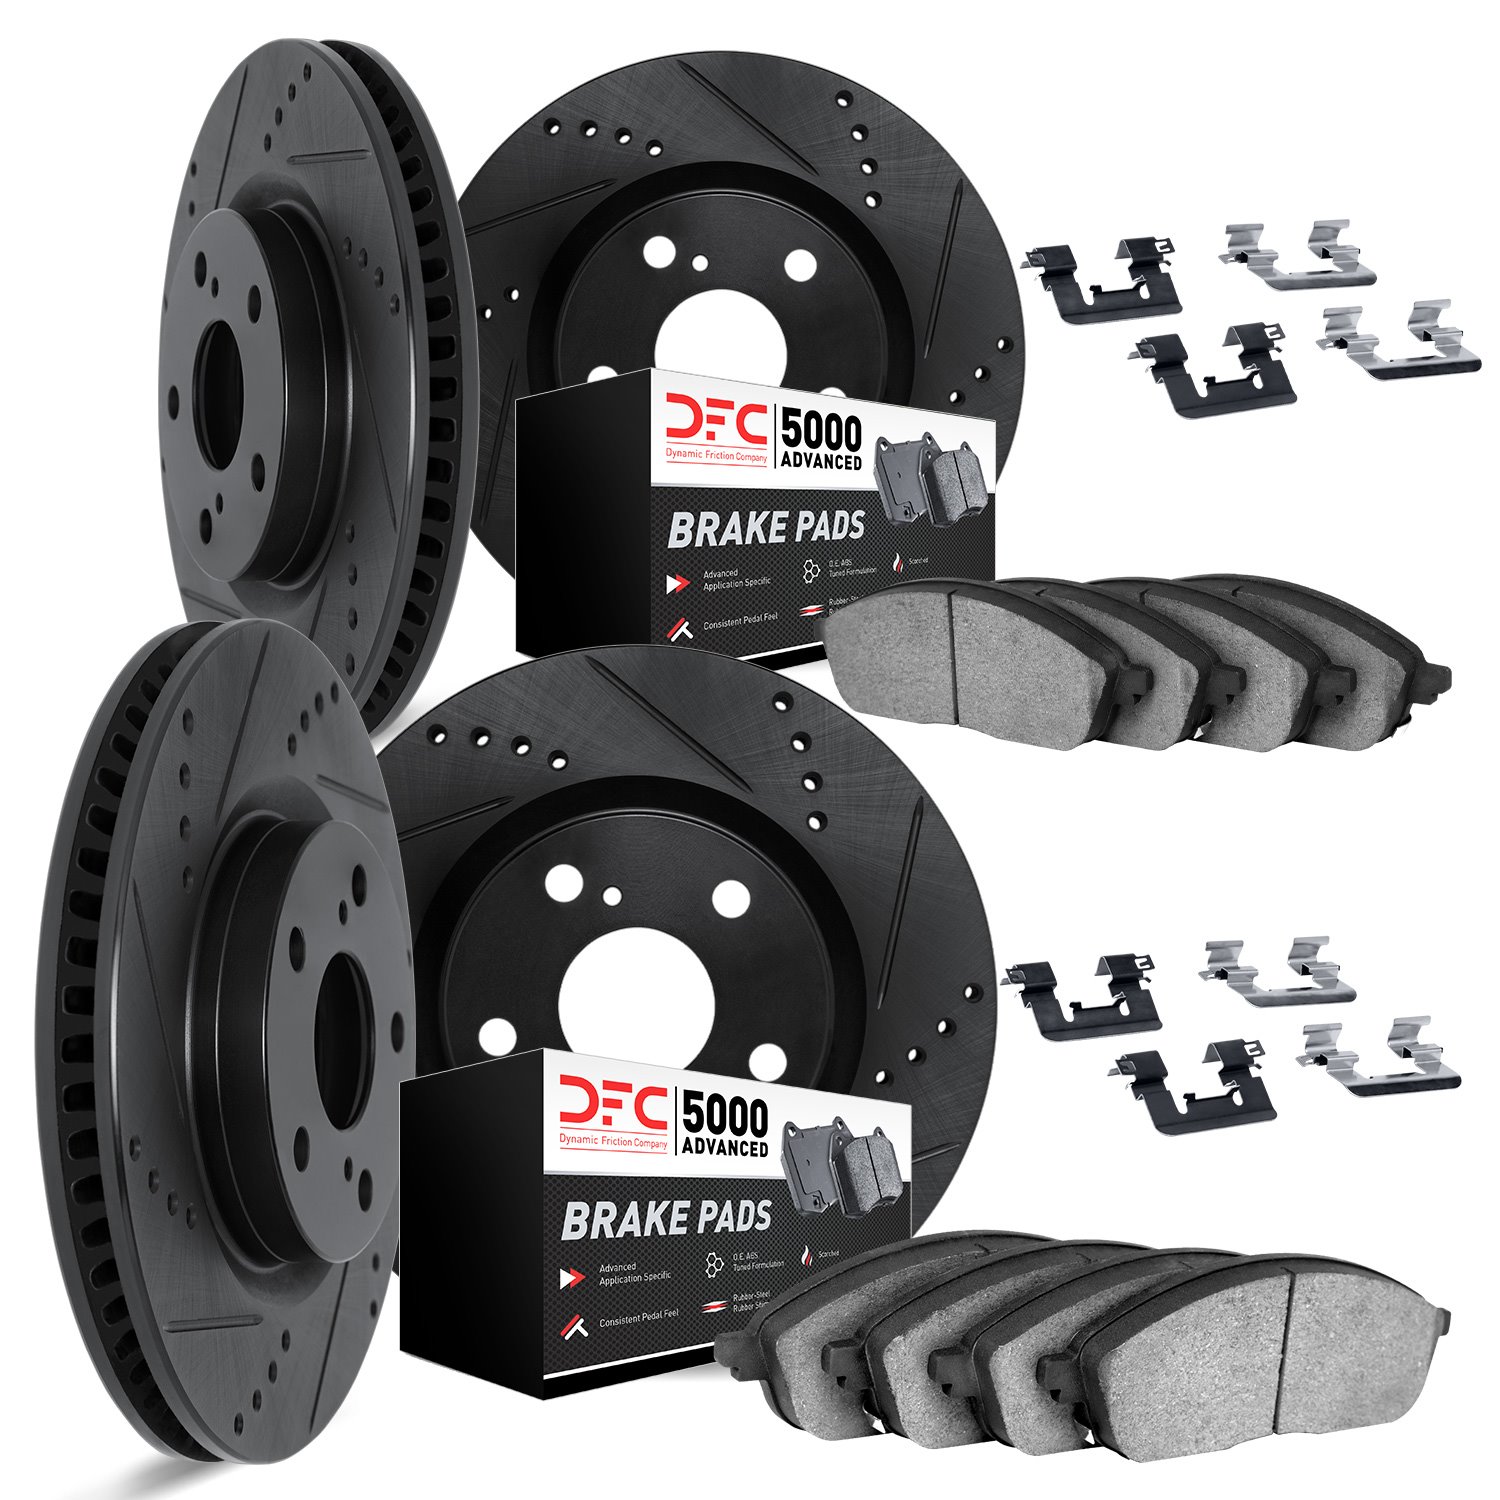 8514-31050 Drilled/Slotted Brake Rotors w/5000 Advanced Brake Pads Kit & Hardware [Black], Fits Select BMW, Position: Front and